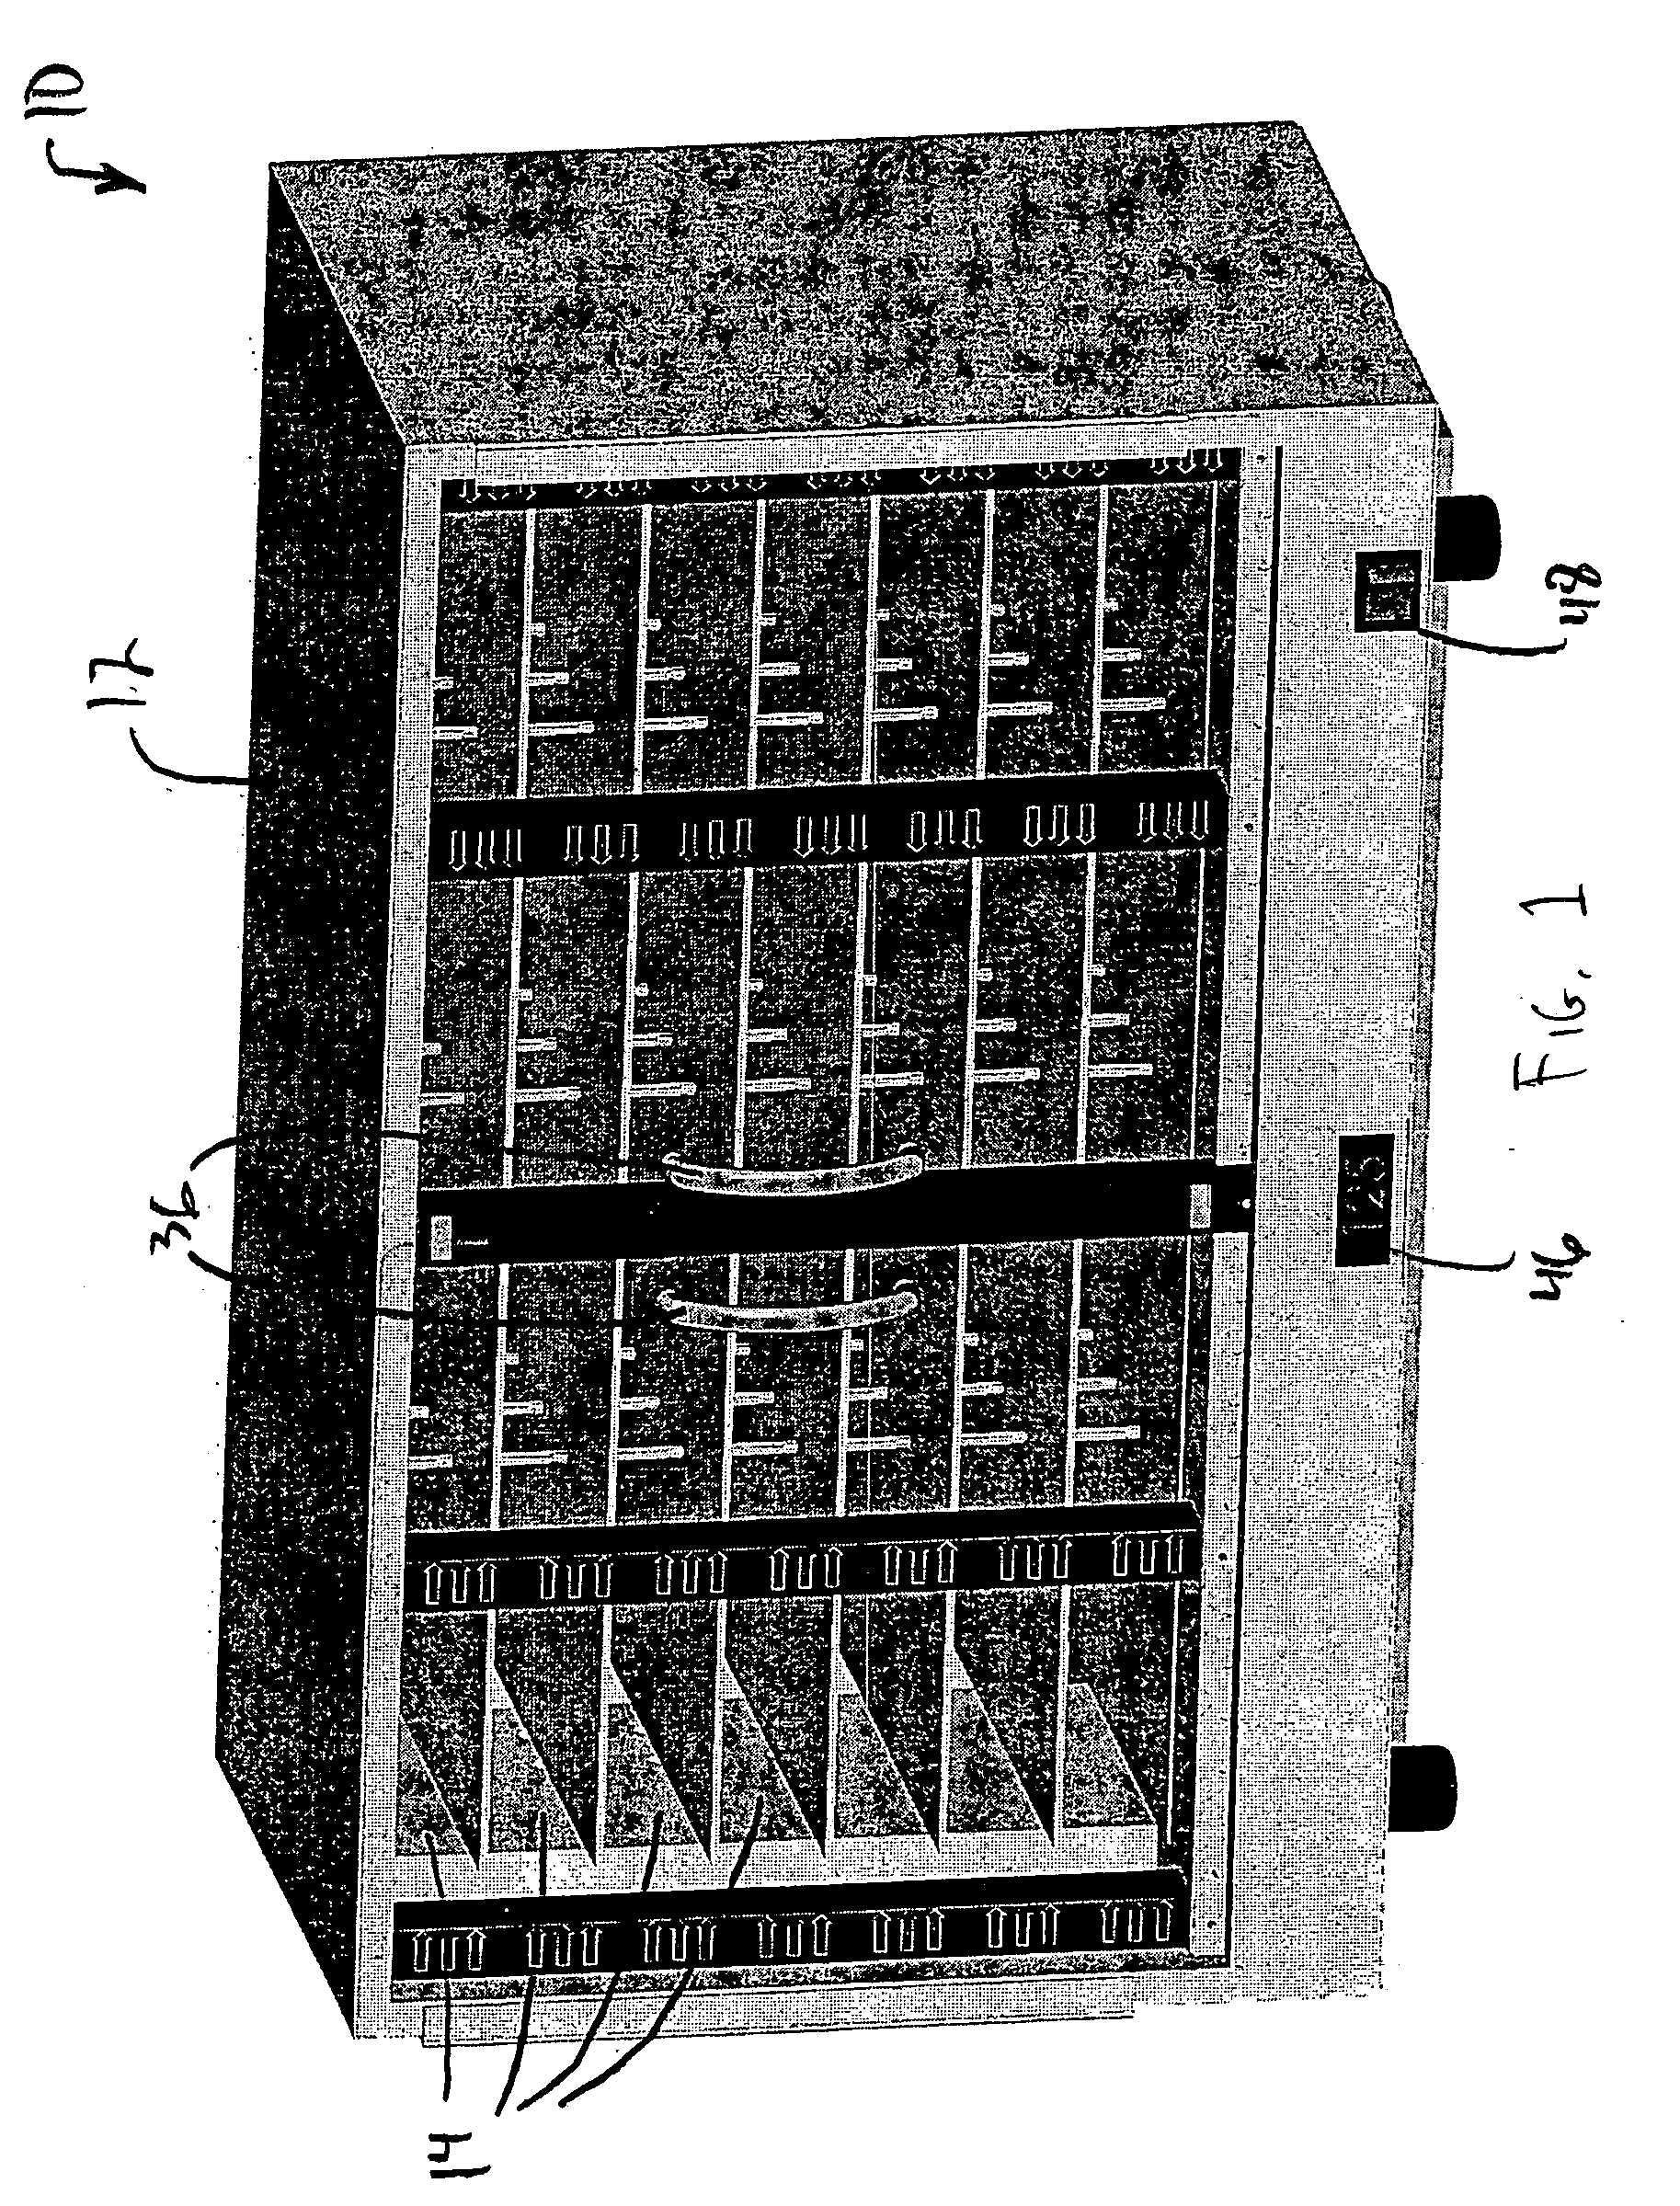 Product storing and dispensing system